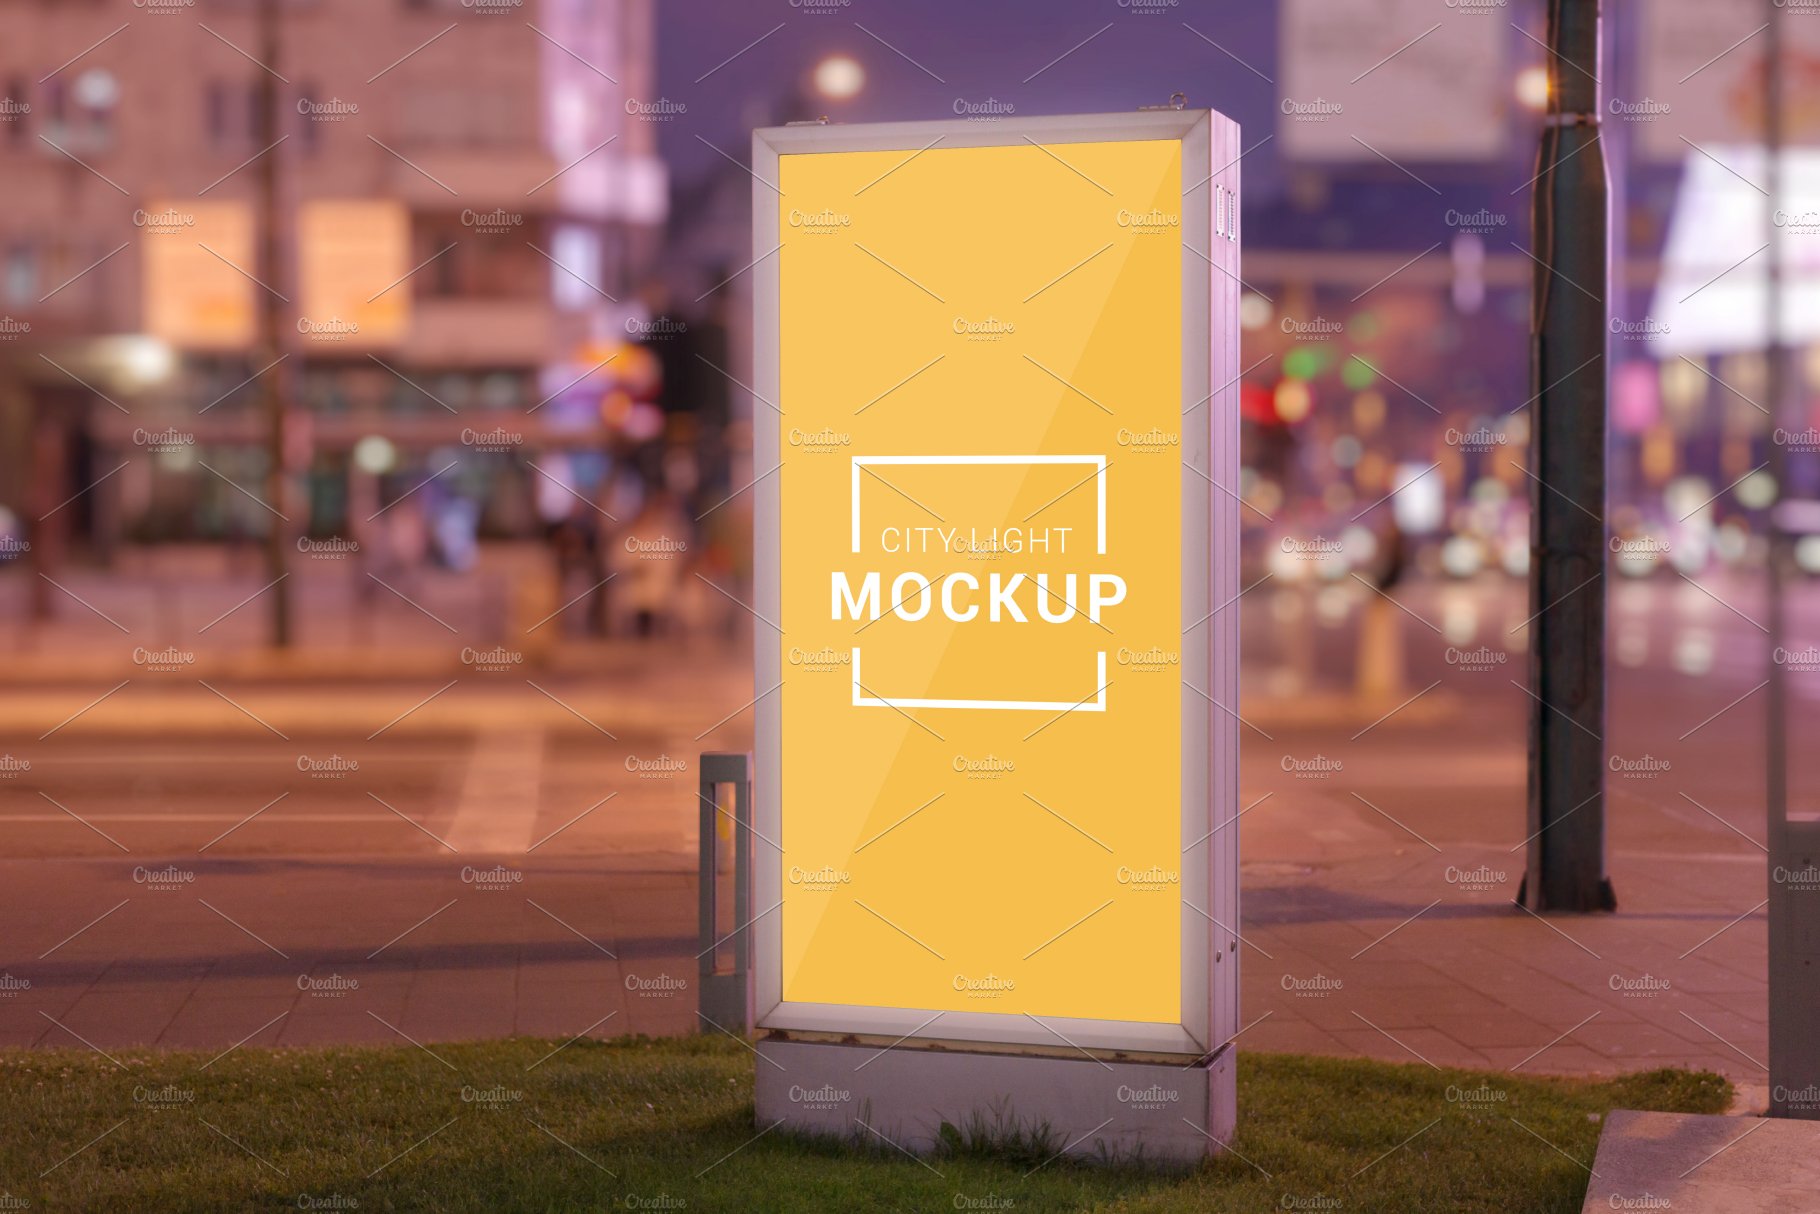 Billboard mockup by night cover image.